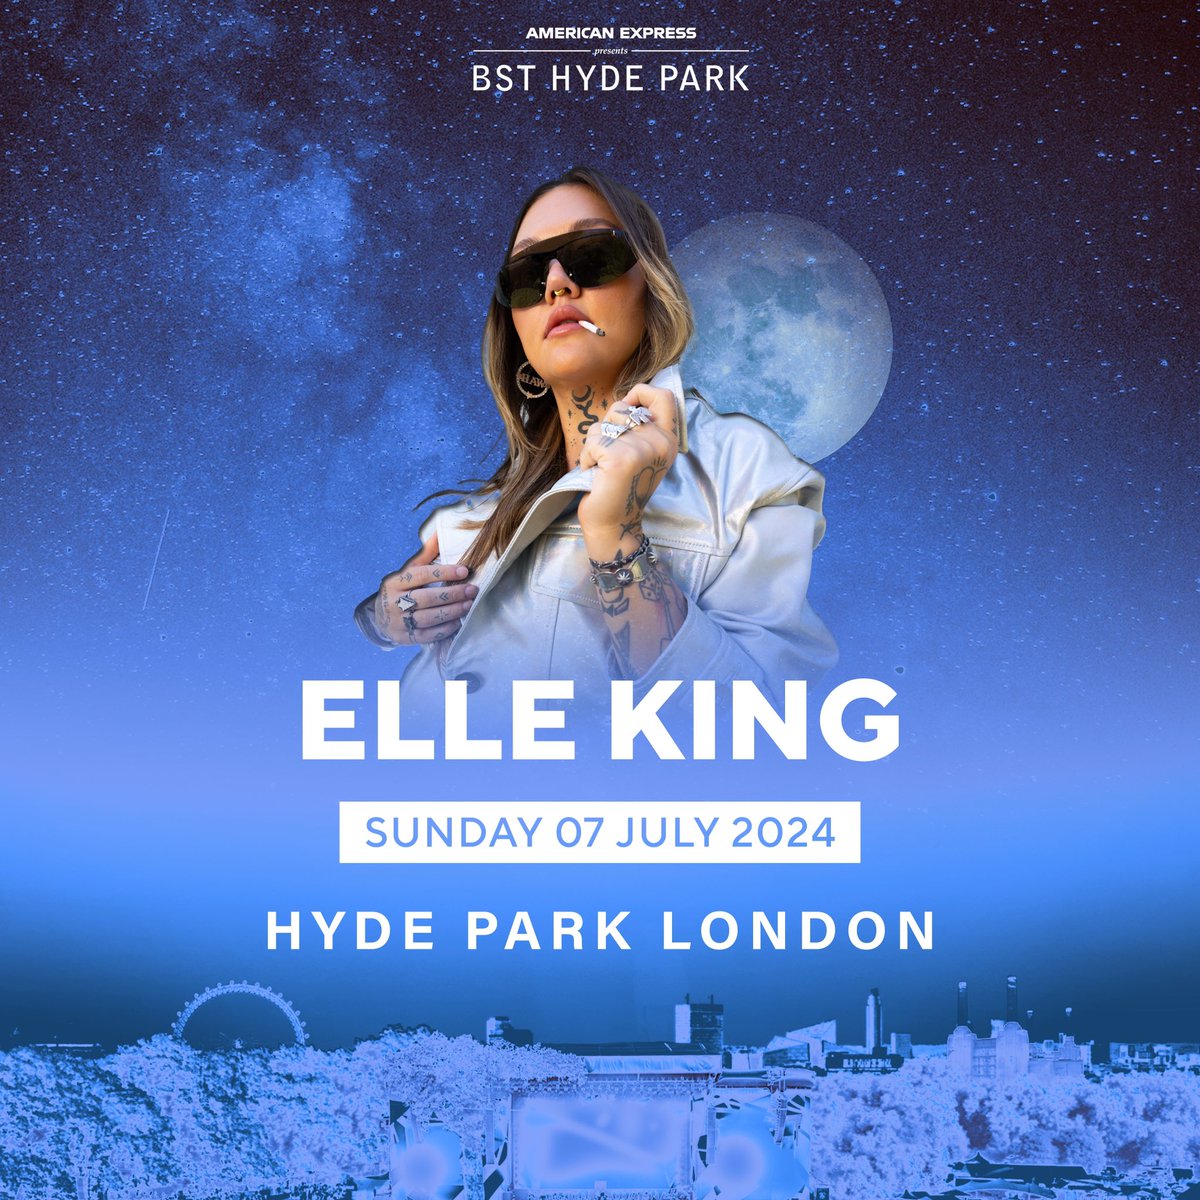 See you at @BSTHydePark! Tickets available here: bst-hydepark.com